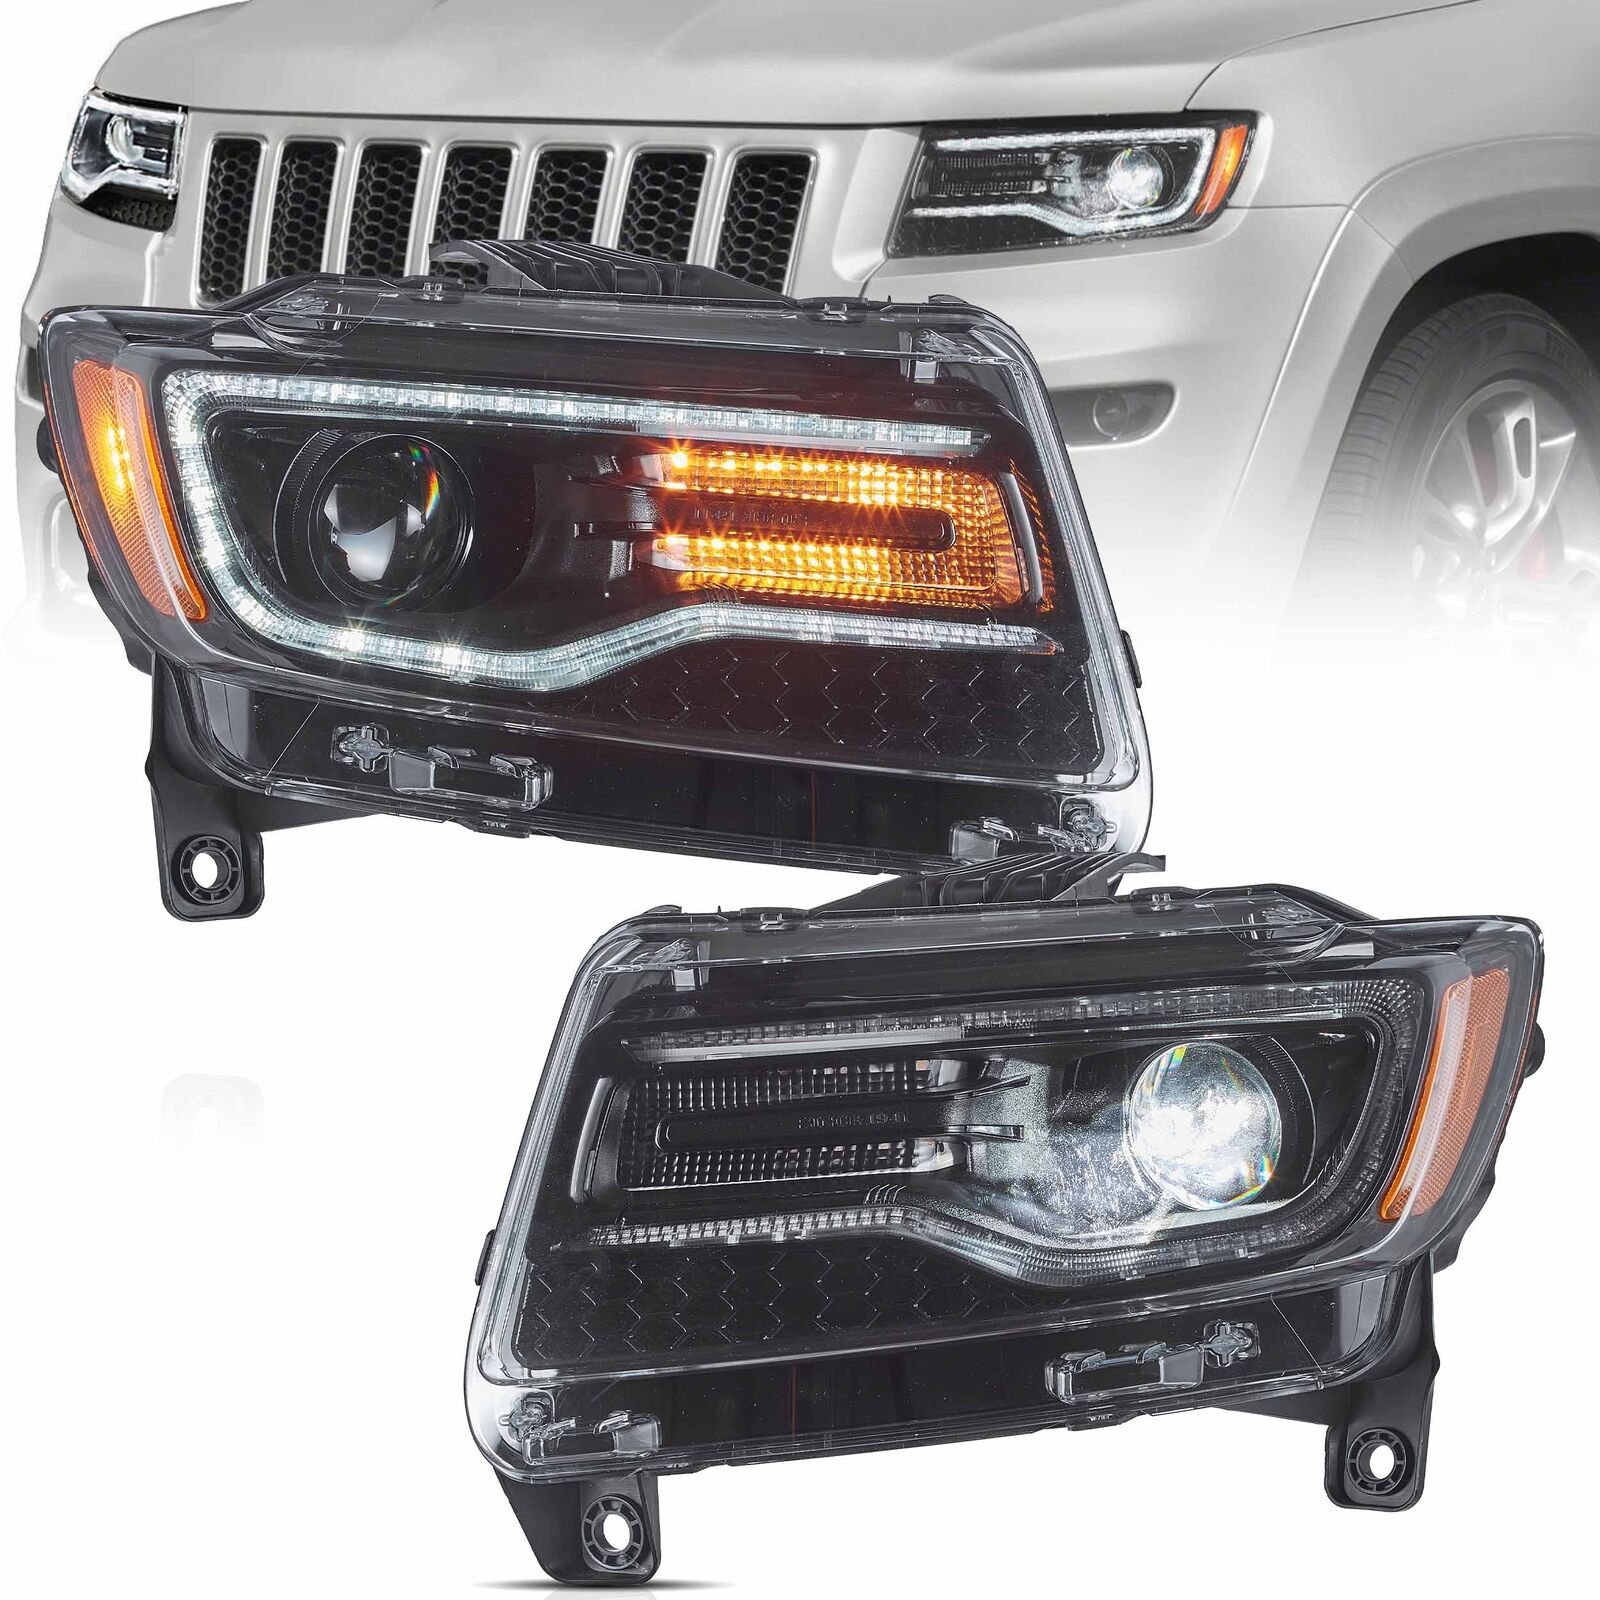 VLAND Full LED Headlights For 2011-2013 Jeep Grand Cherokee W/Sequential Lamps